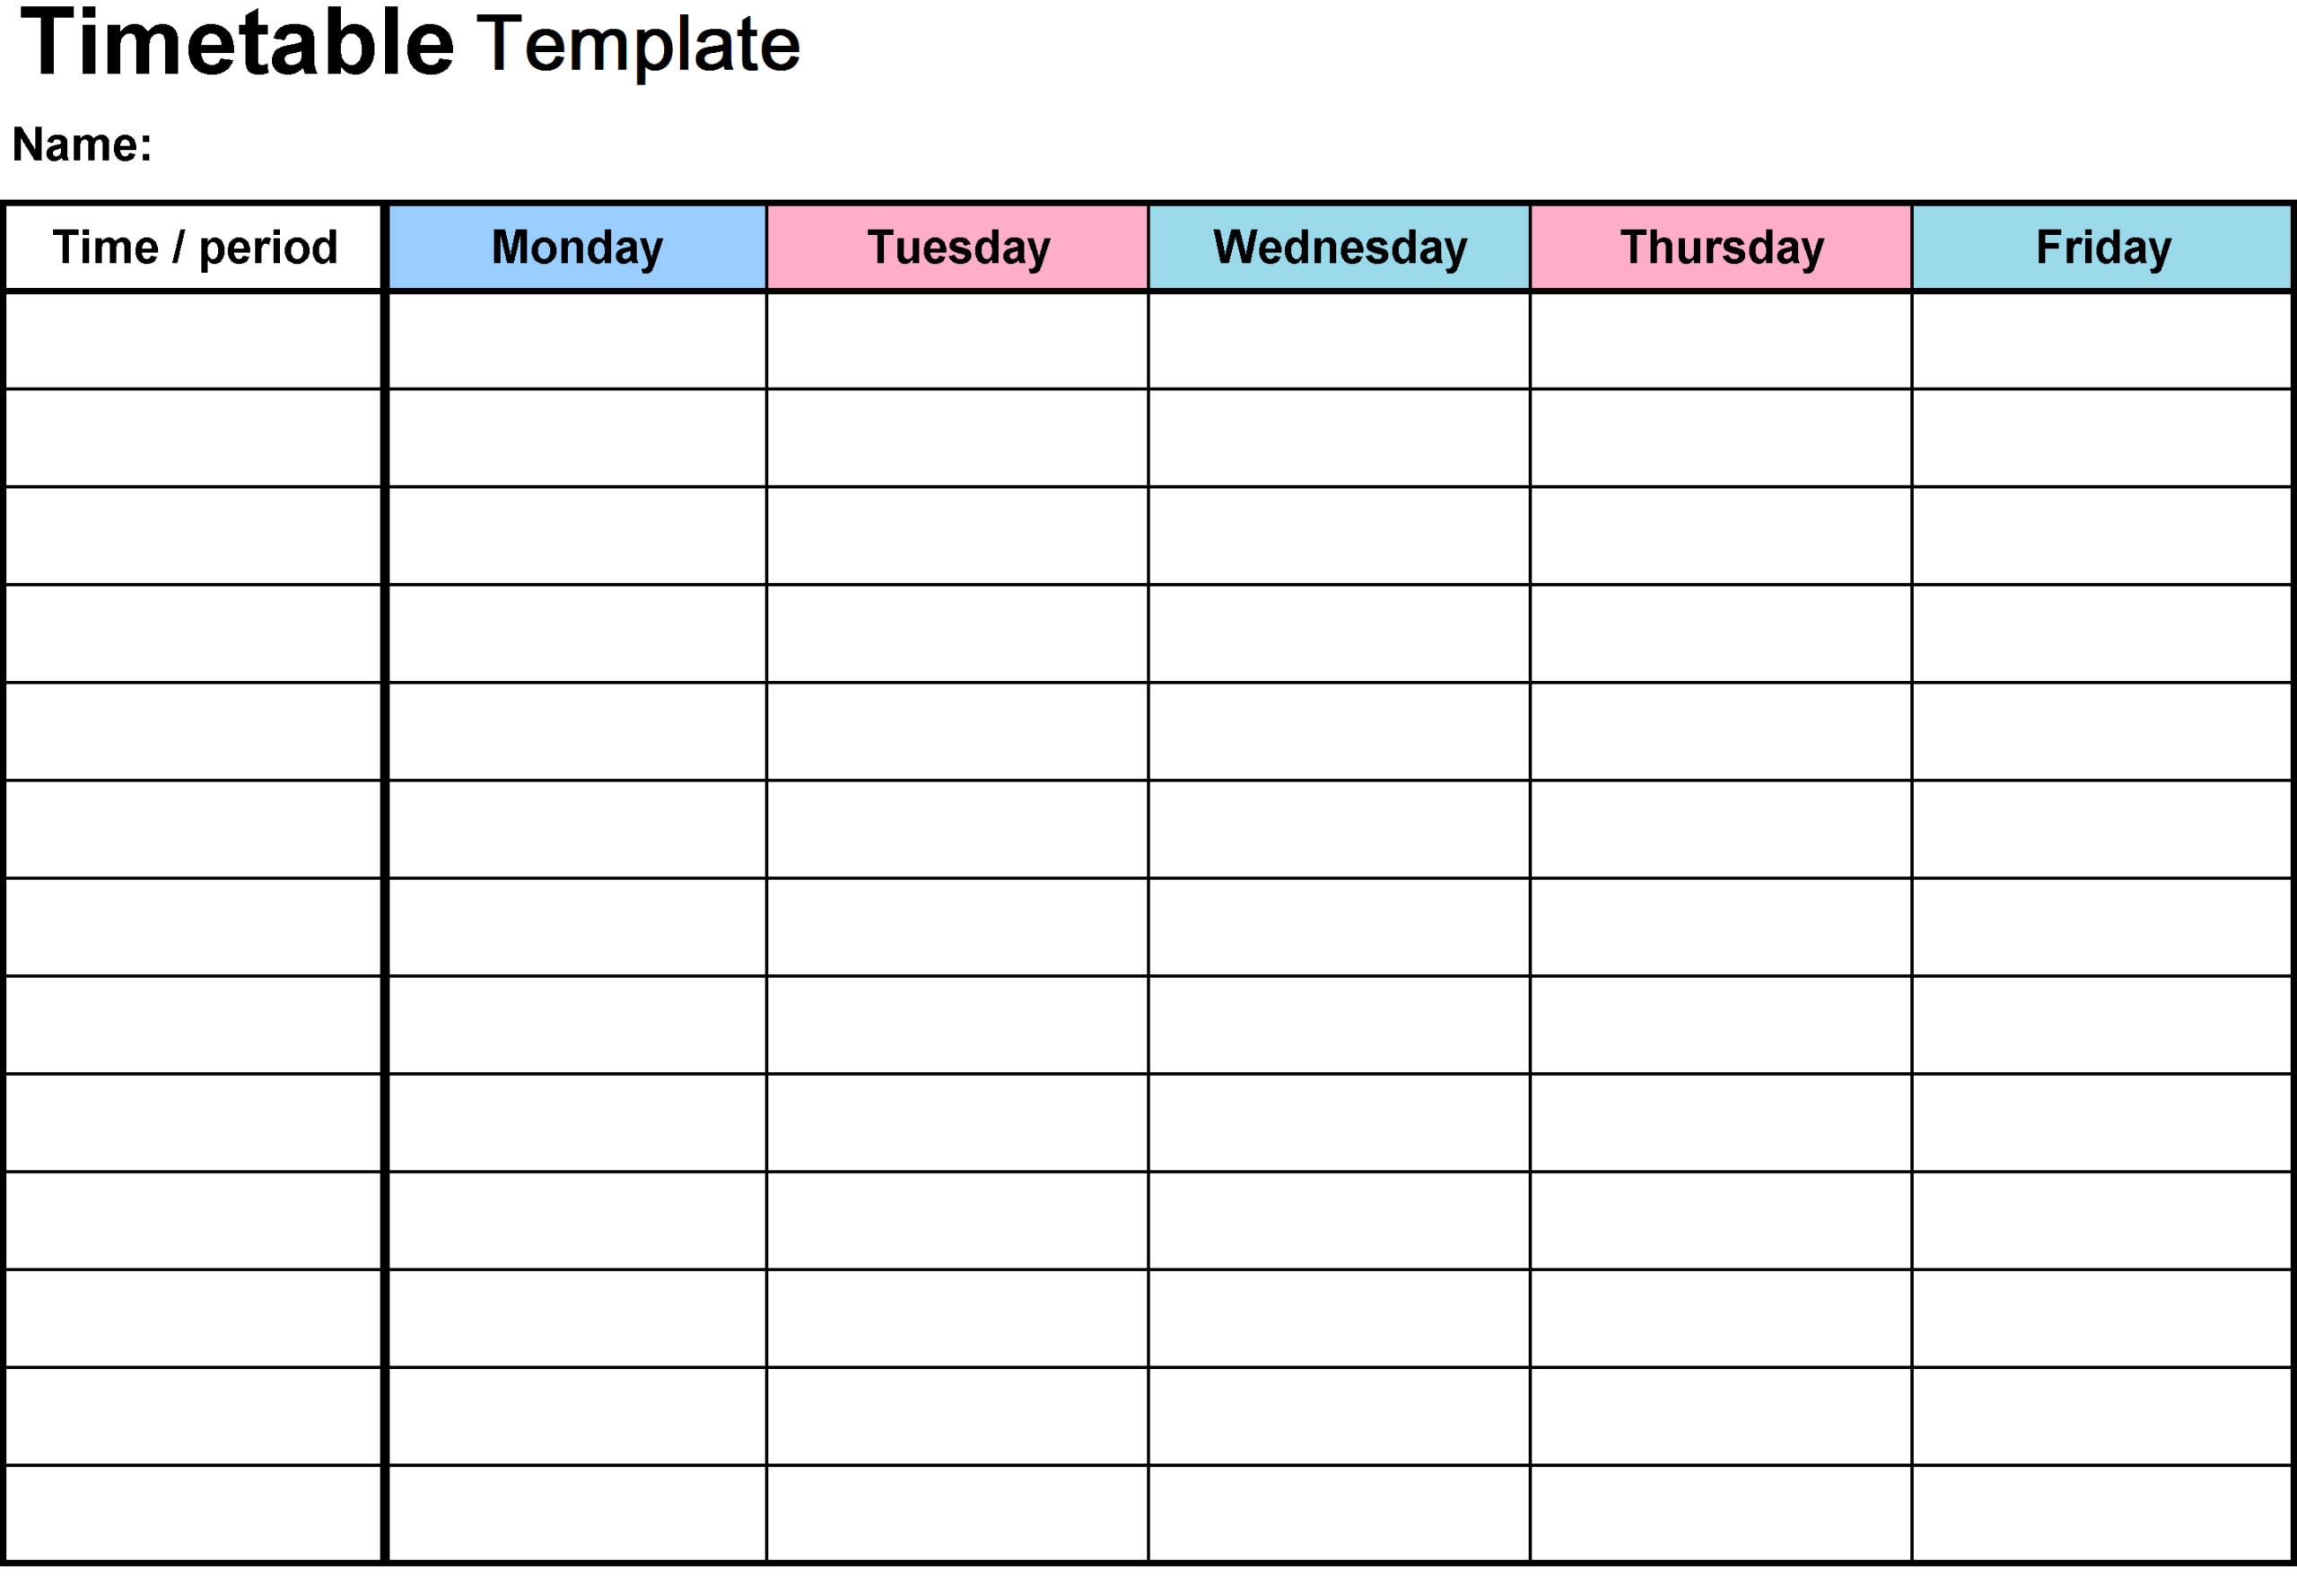 Timetable Template 2018 #collegetimetabletemplateword Throughout Blank Revision Timetable Template